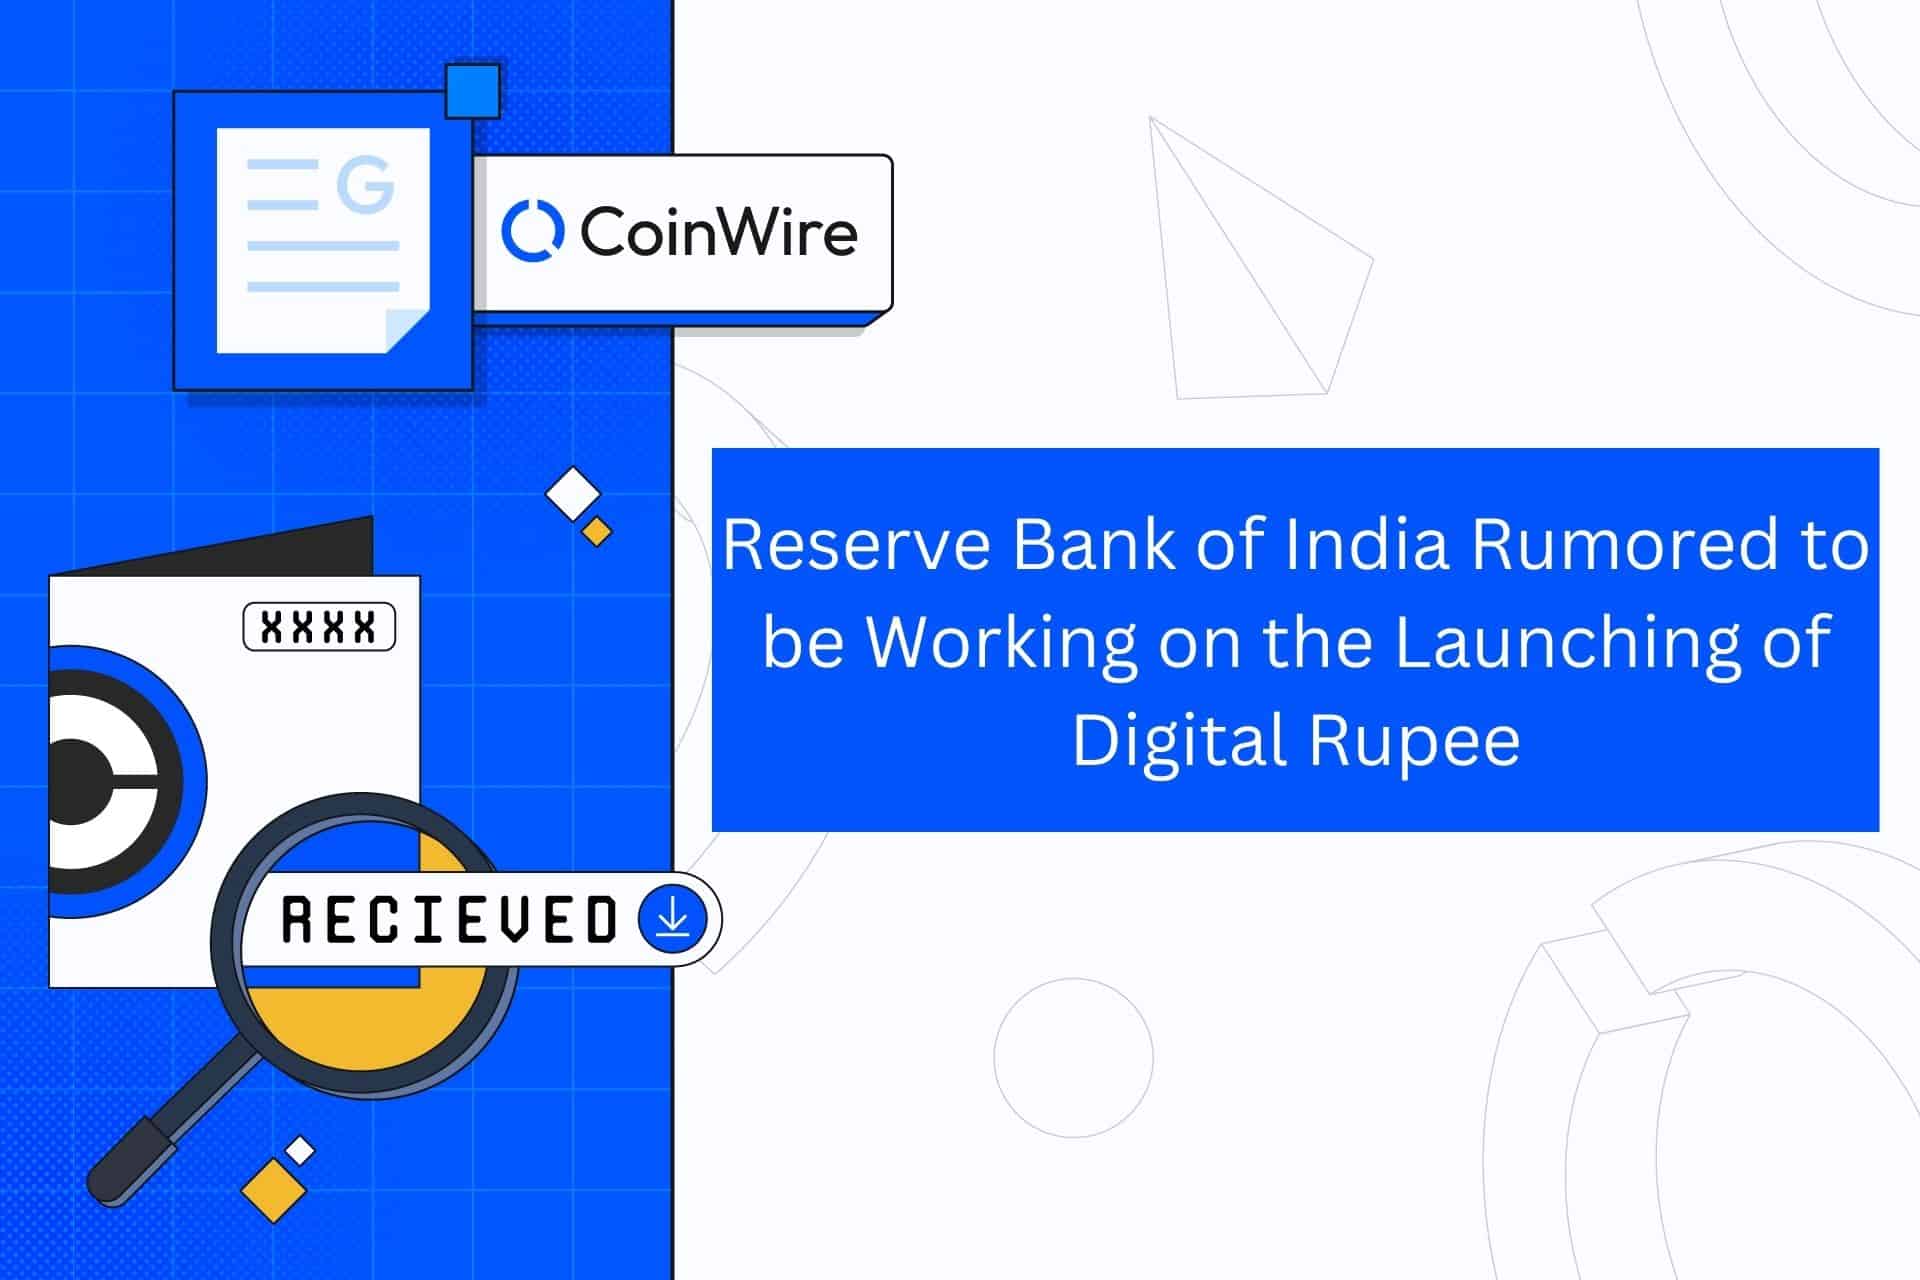 Reserve Bank Of India Rumored To Be Working On The Launching Of Digital Rupee